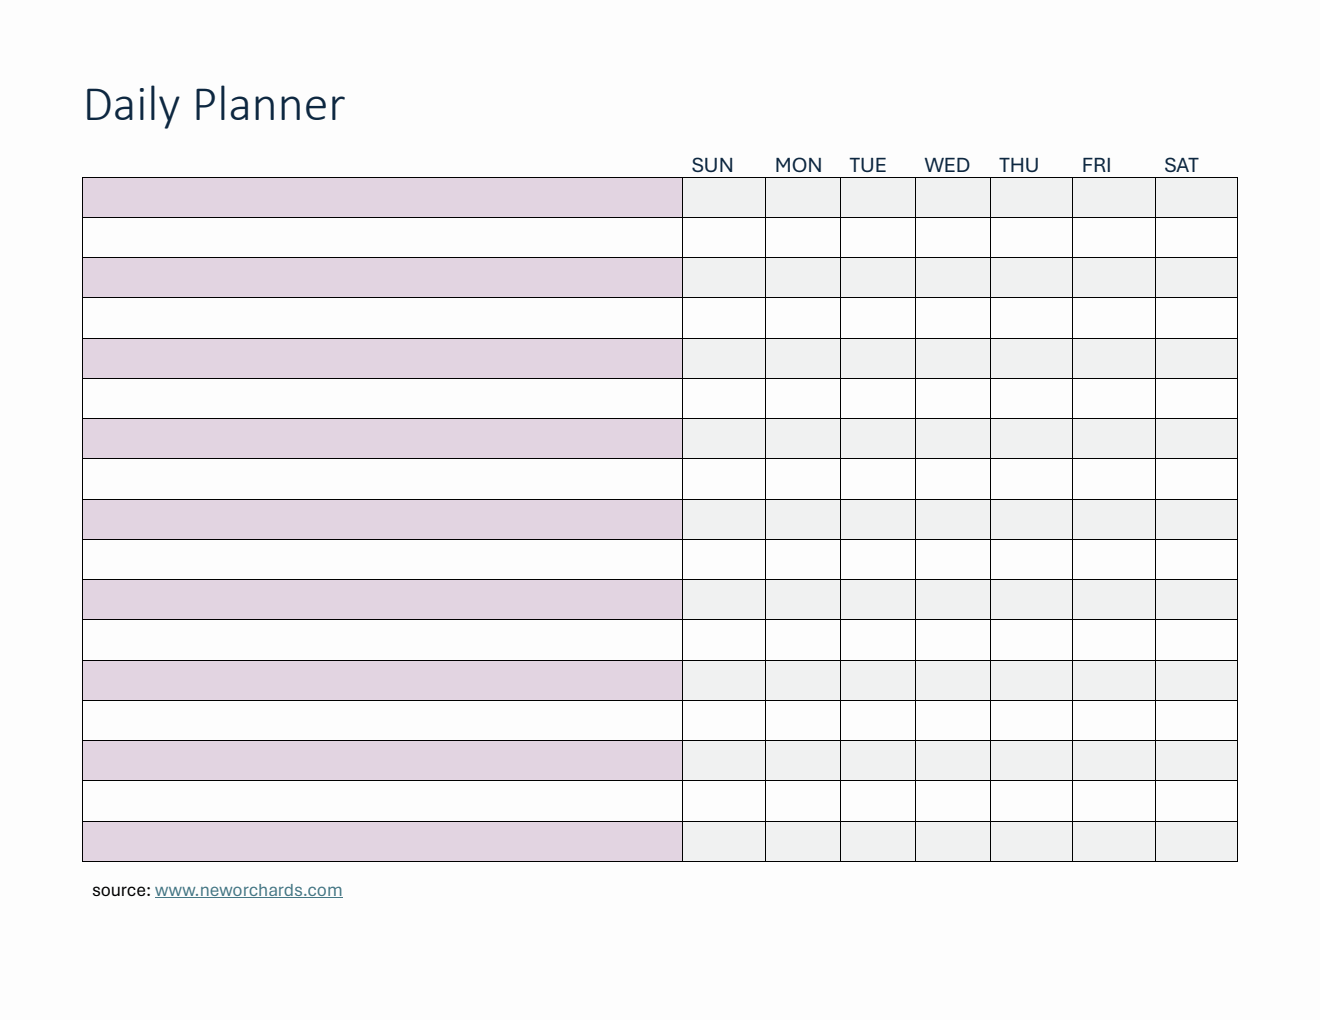 Daily Planner and Checklist Template in PDF (Basic)